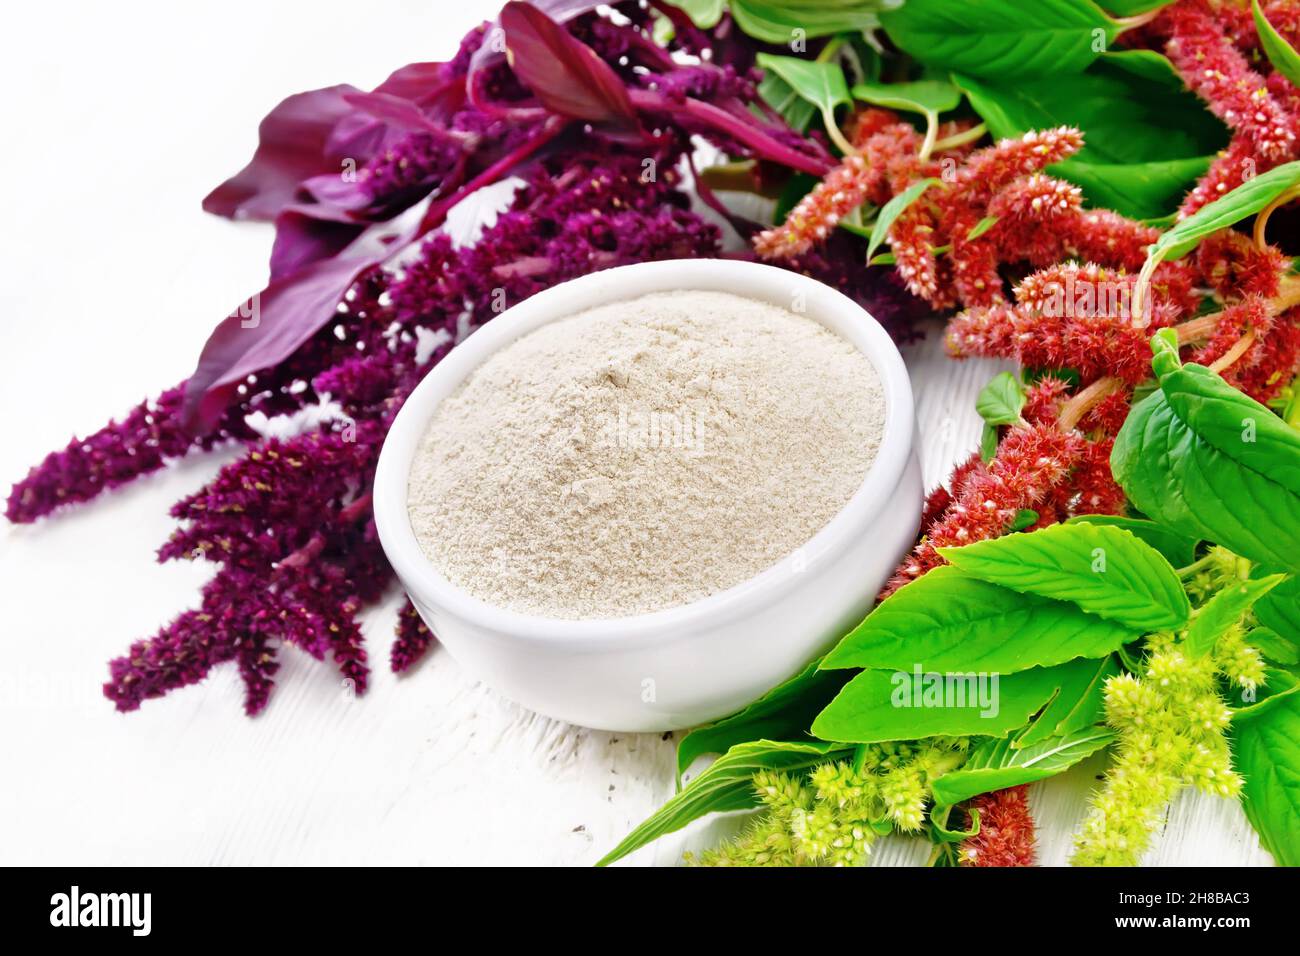 Amaranth flour in a bowl, brown, green and purple flowers and leaves of a plant on white wooden board background Stock Photo